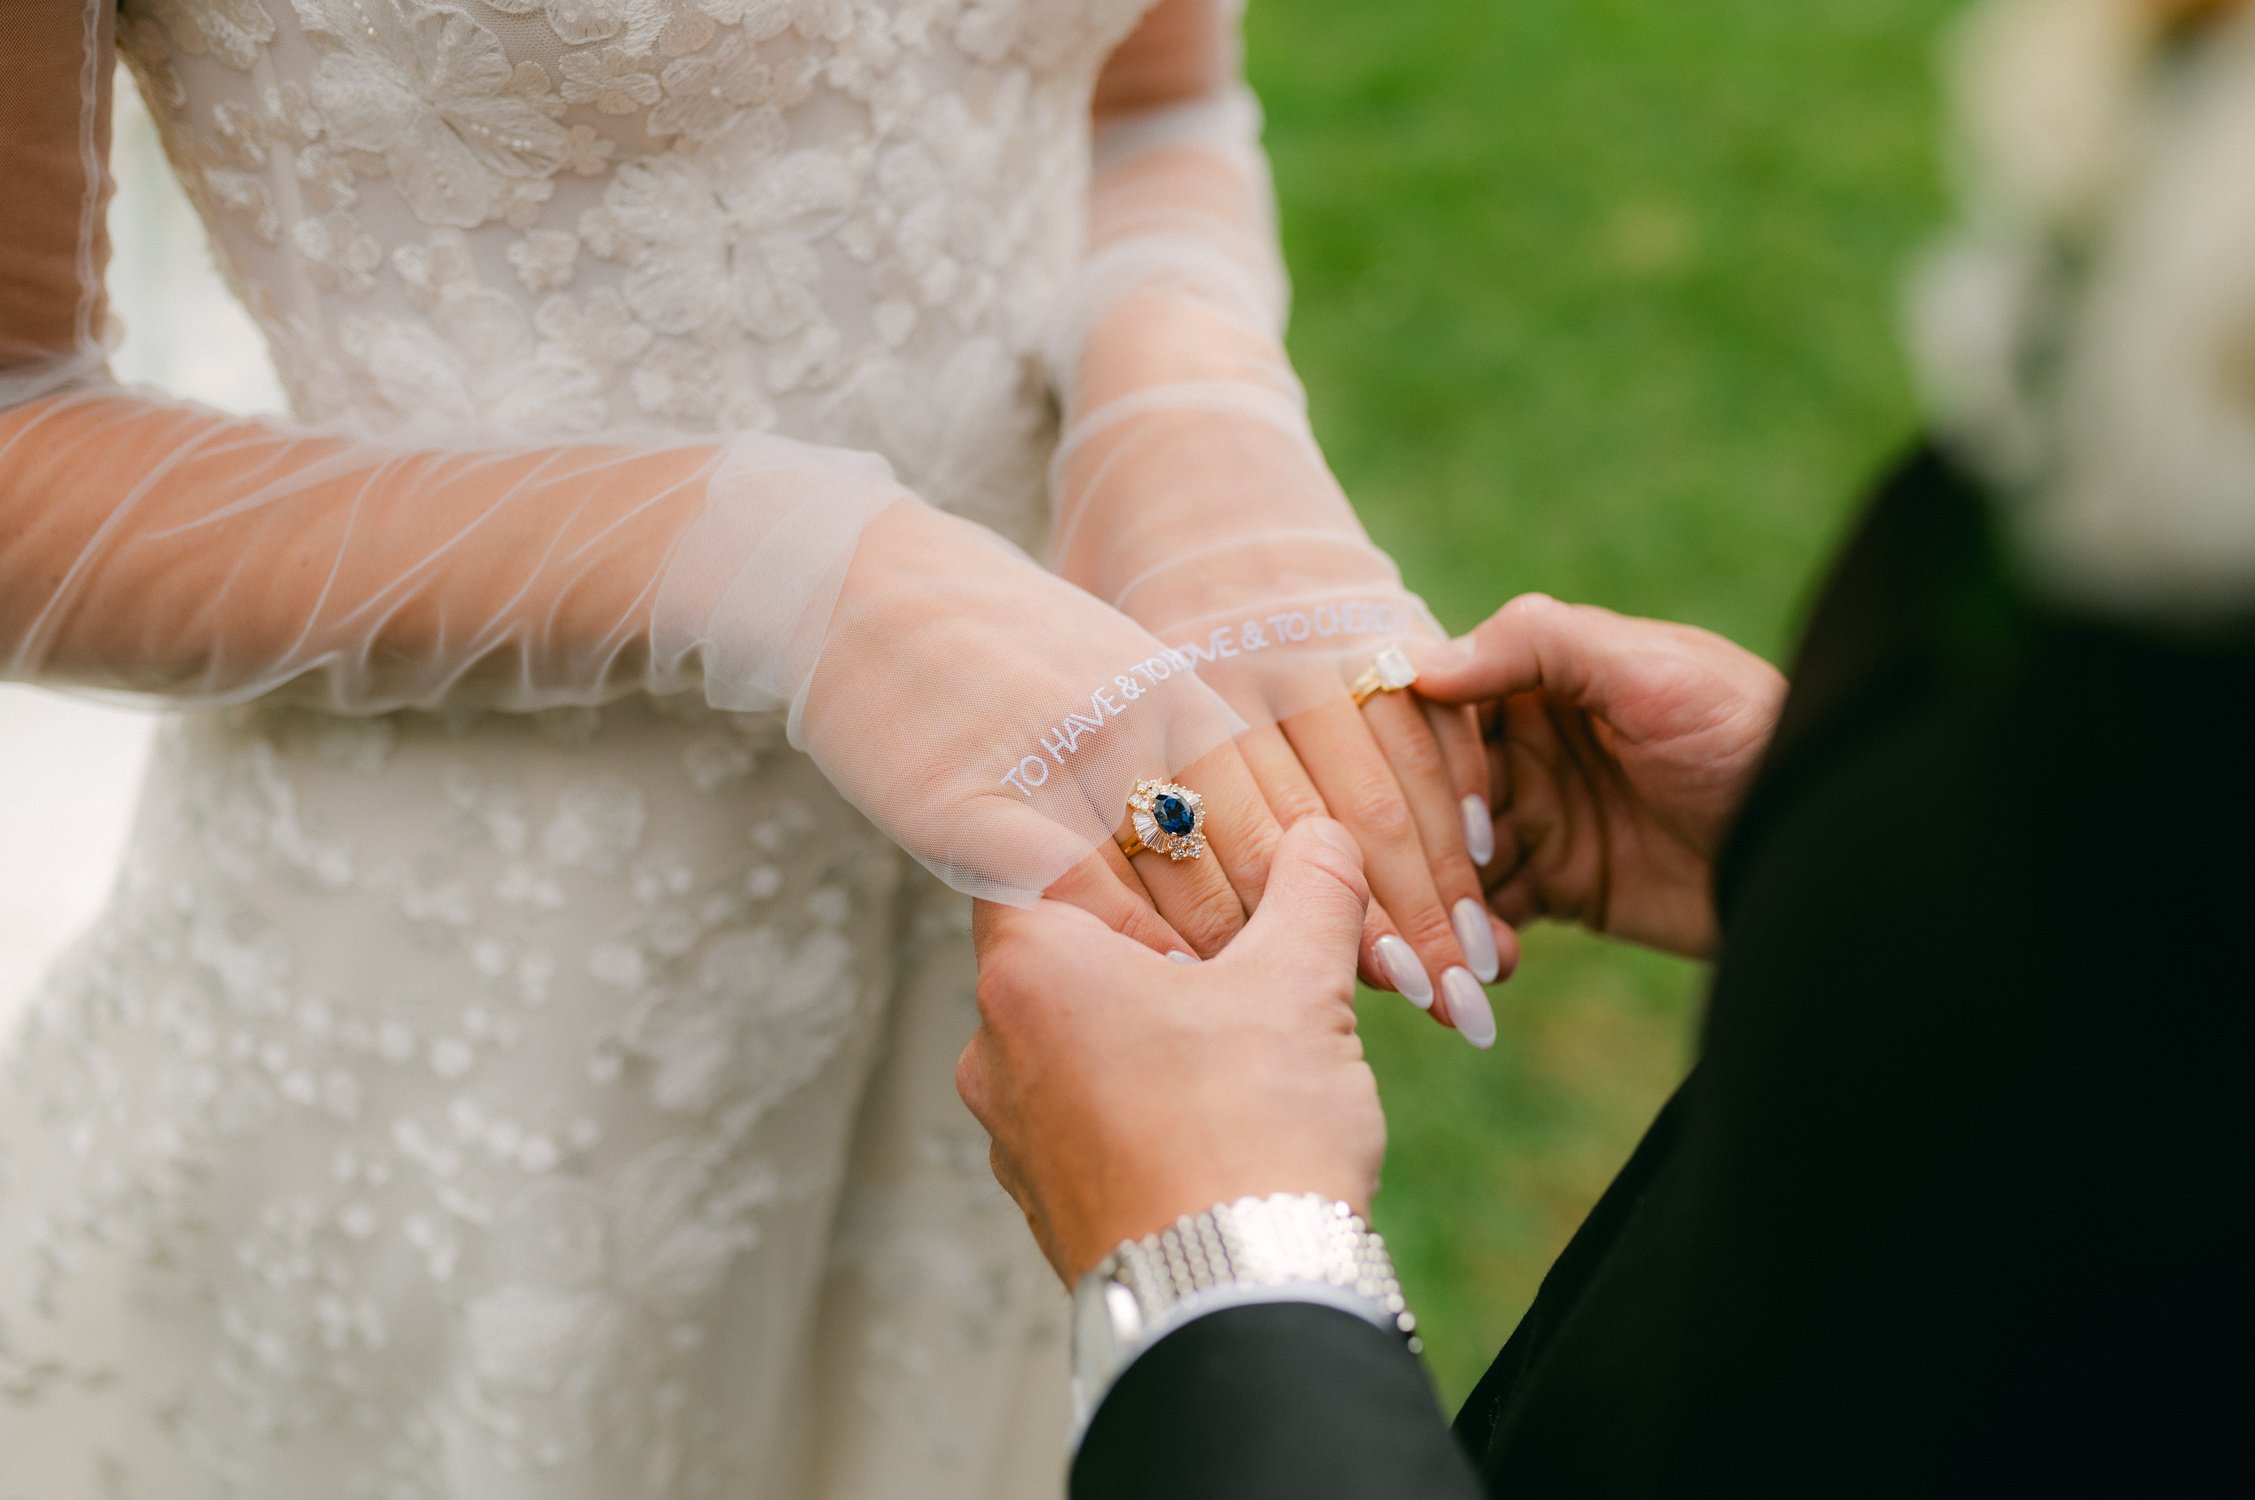 Elm Estate Wedding photos, photo of the bride and groom holding hands together, seeing all the elegant details of the bride with the customized sleeve, sapphire rings, and neutral wedding nails